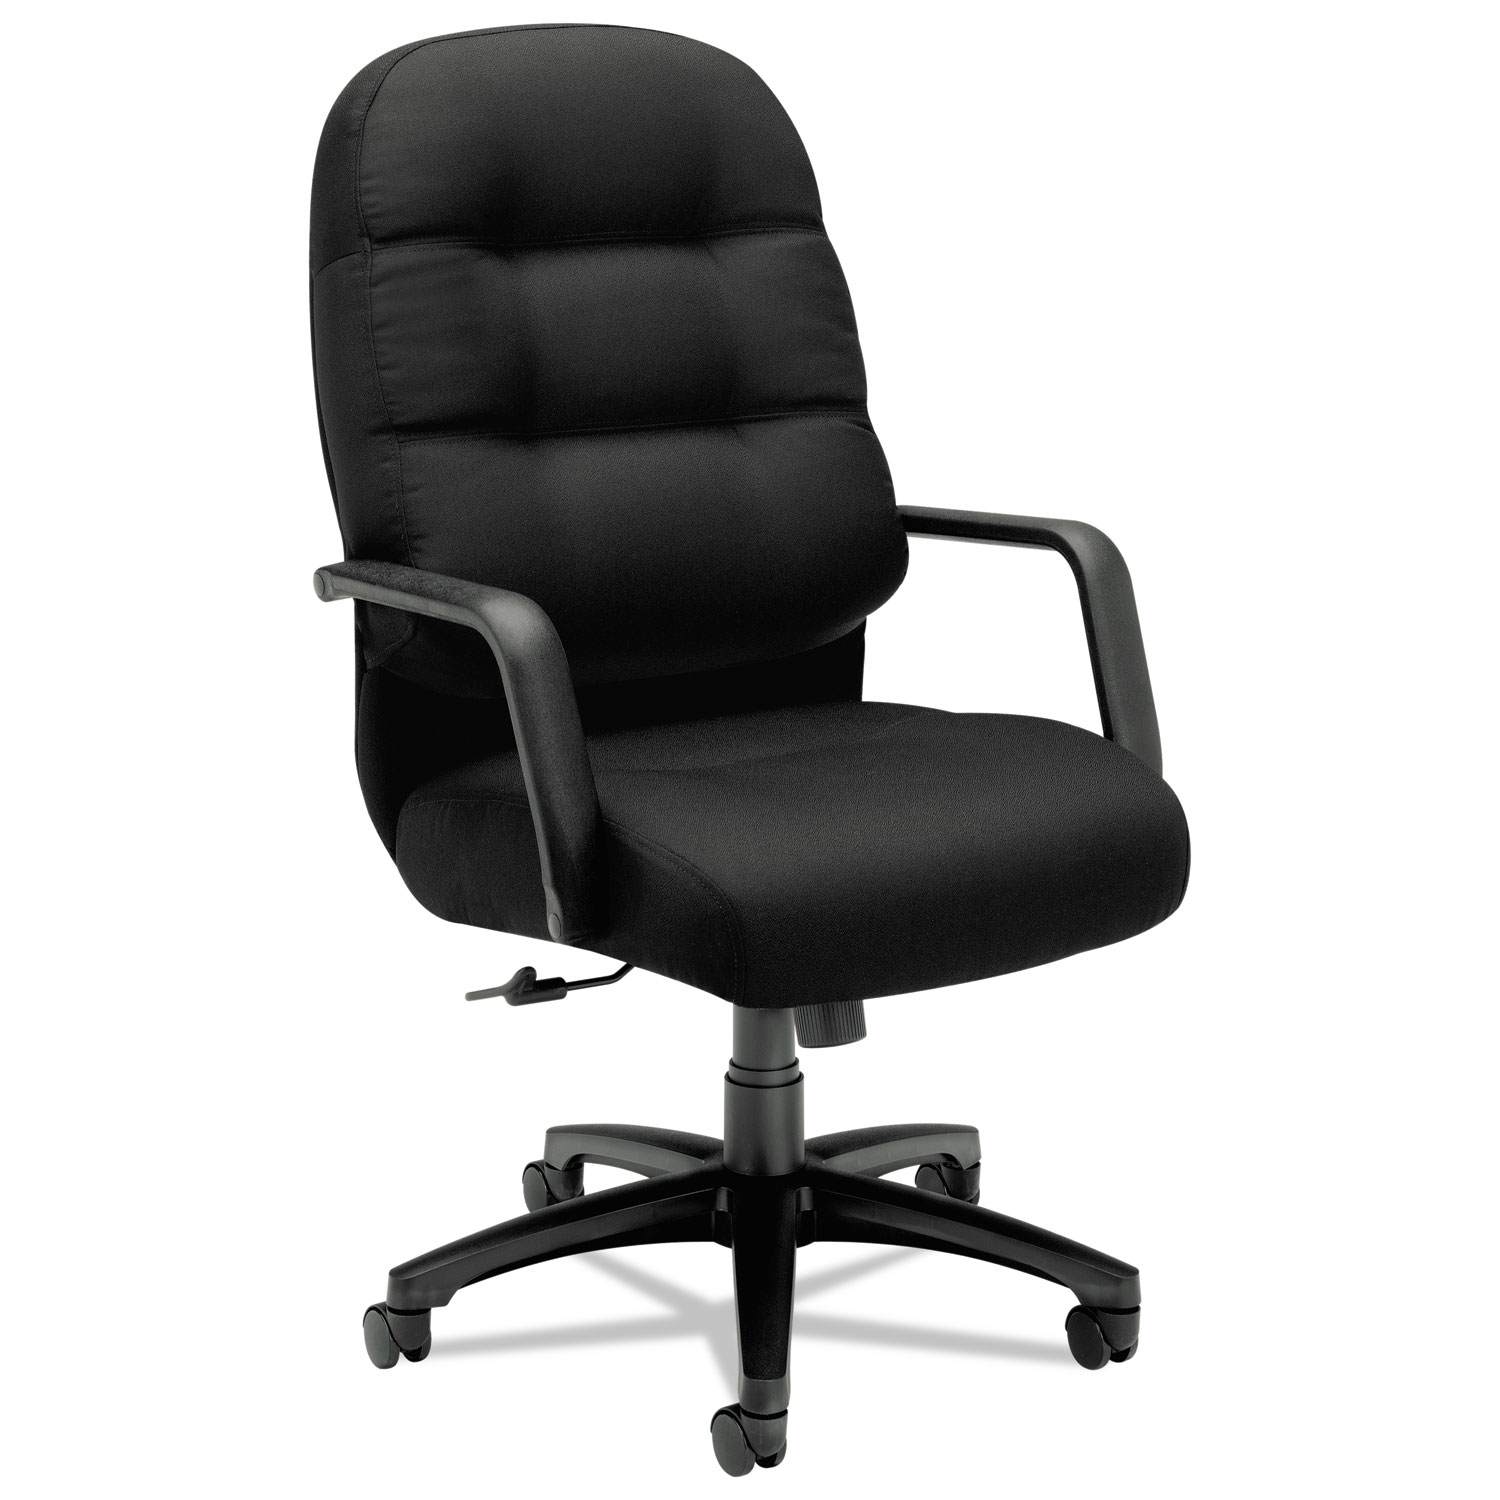  HON H2091.H.CU10.T Pillow-Soft 2090 Series Executive High-Back Swivel/Tilt Chair, Supports up to 300 lbs., Black Seat/Black Back, Black Base (HON2091CU10T) 